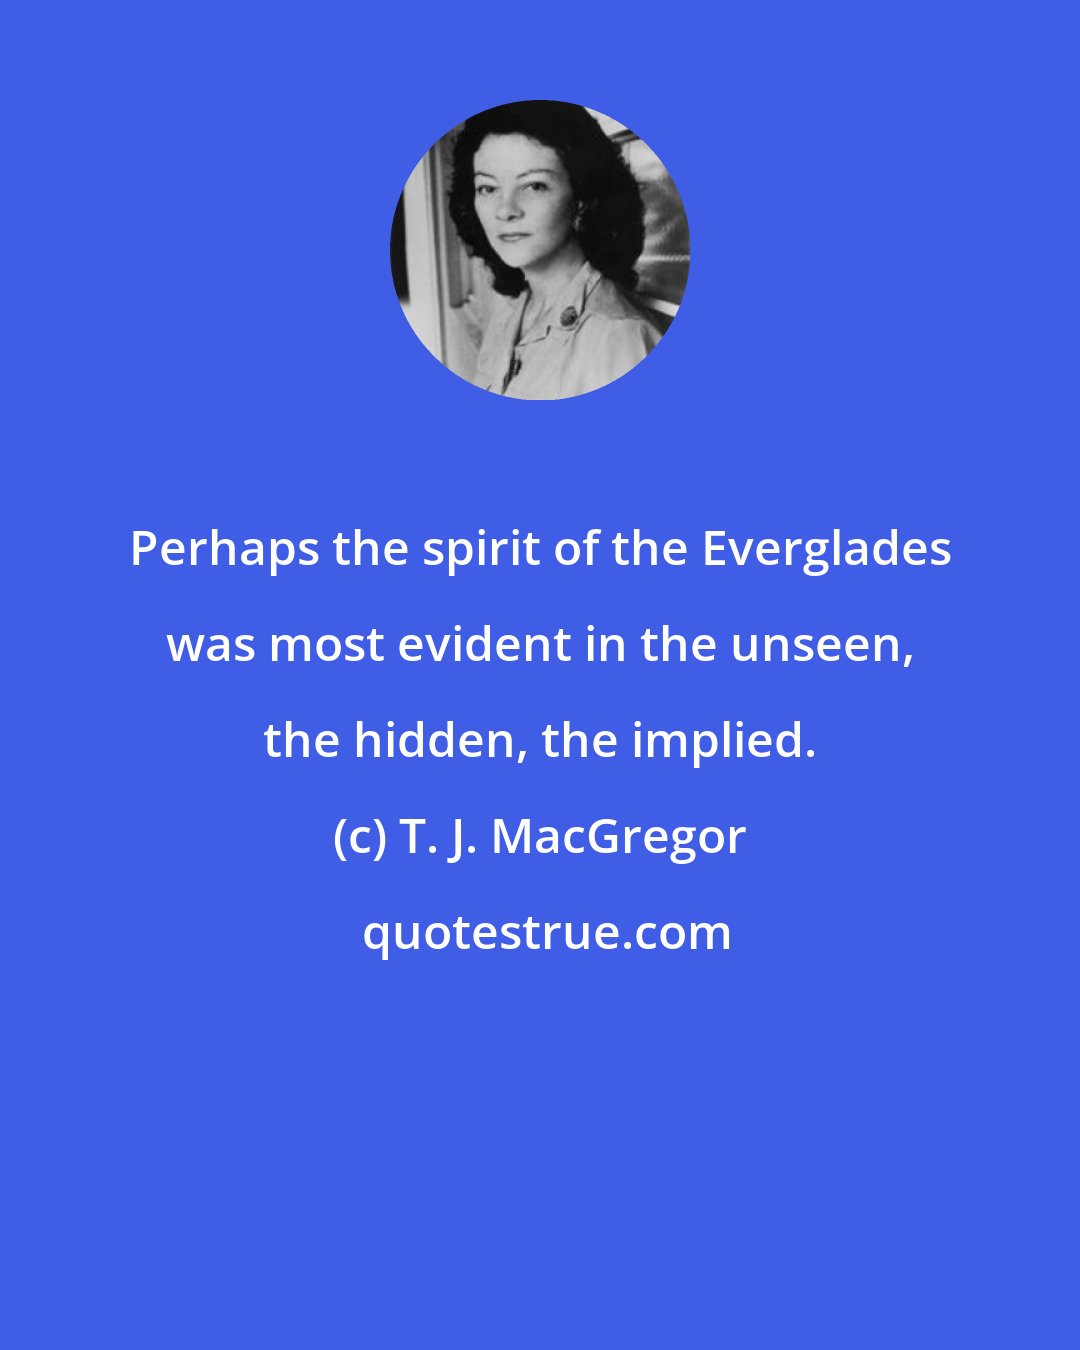 T. J. MacGregor: Perhaps the spirit of the Everglades was most evident in the unseen, the hidden, the implied.